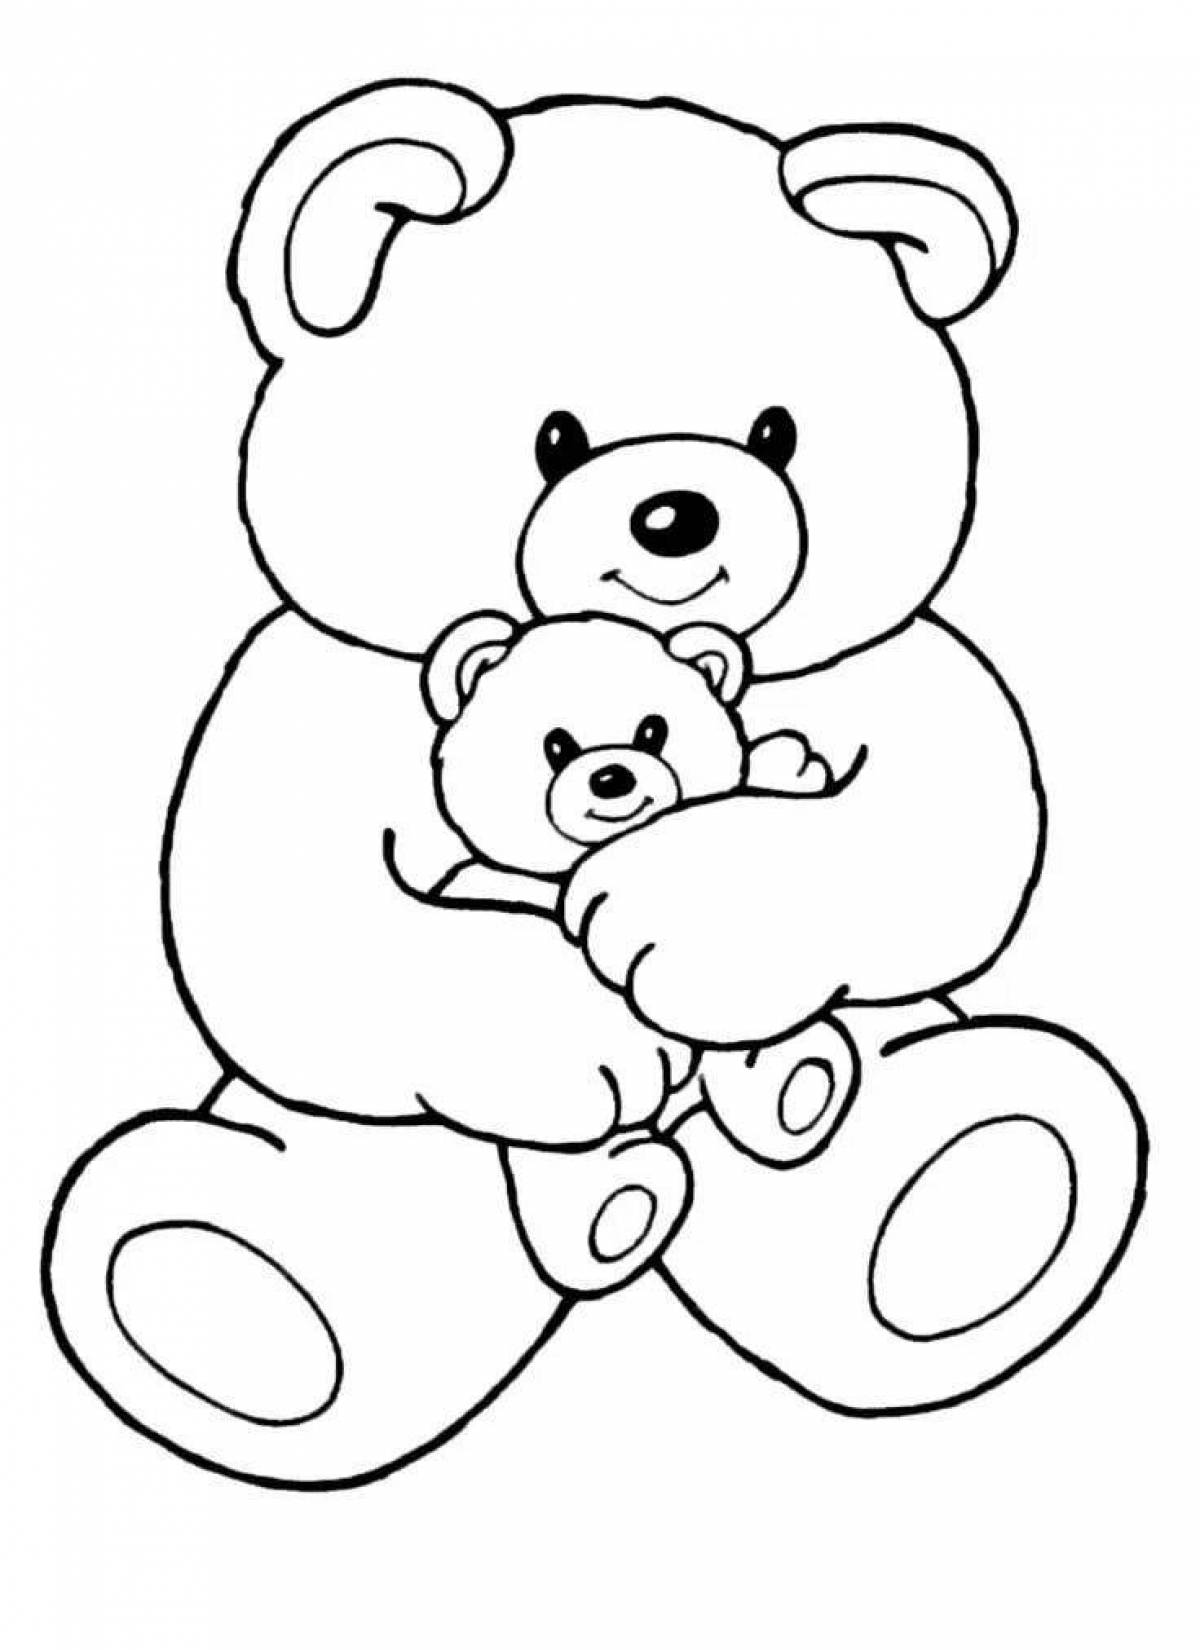 Thoughtful teddy bear coloring book for kids